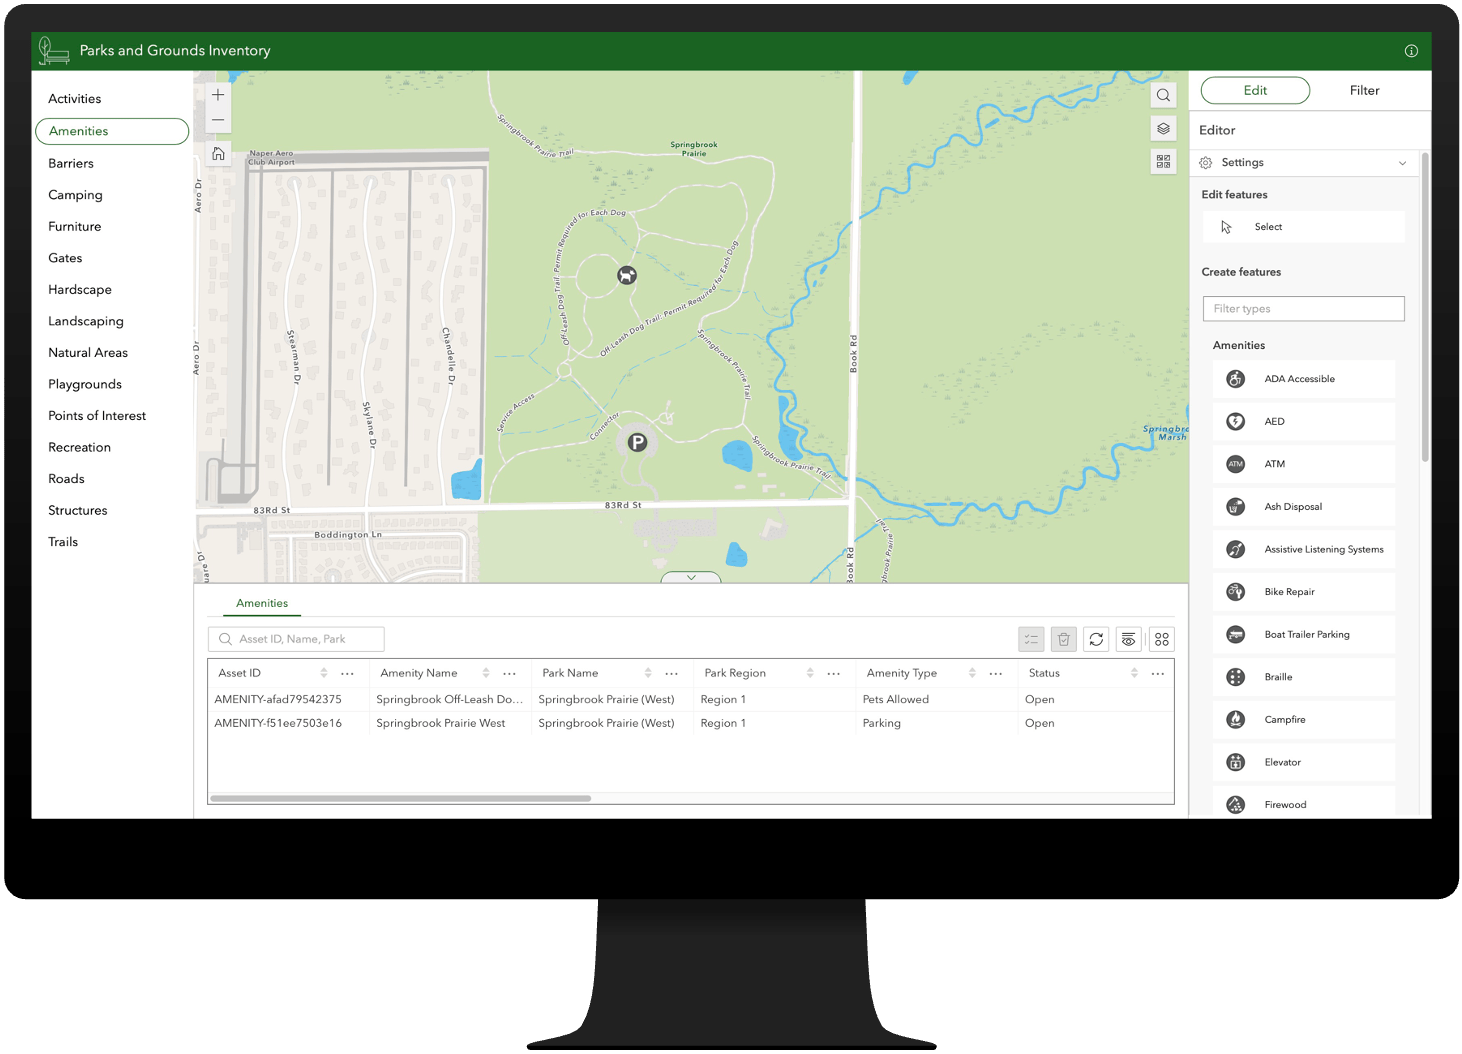 Parks and Grounds Inventory app, part of the Parks and Grounds Management ArcGIS Solution.